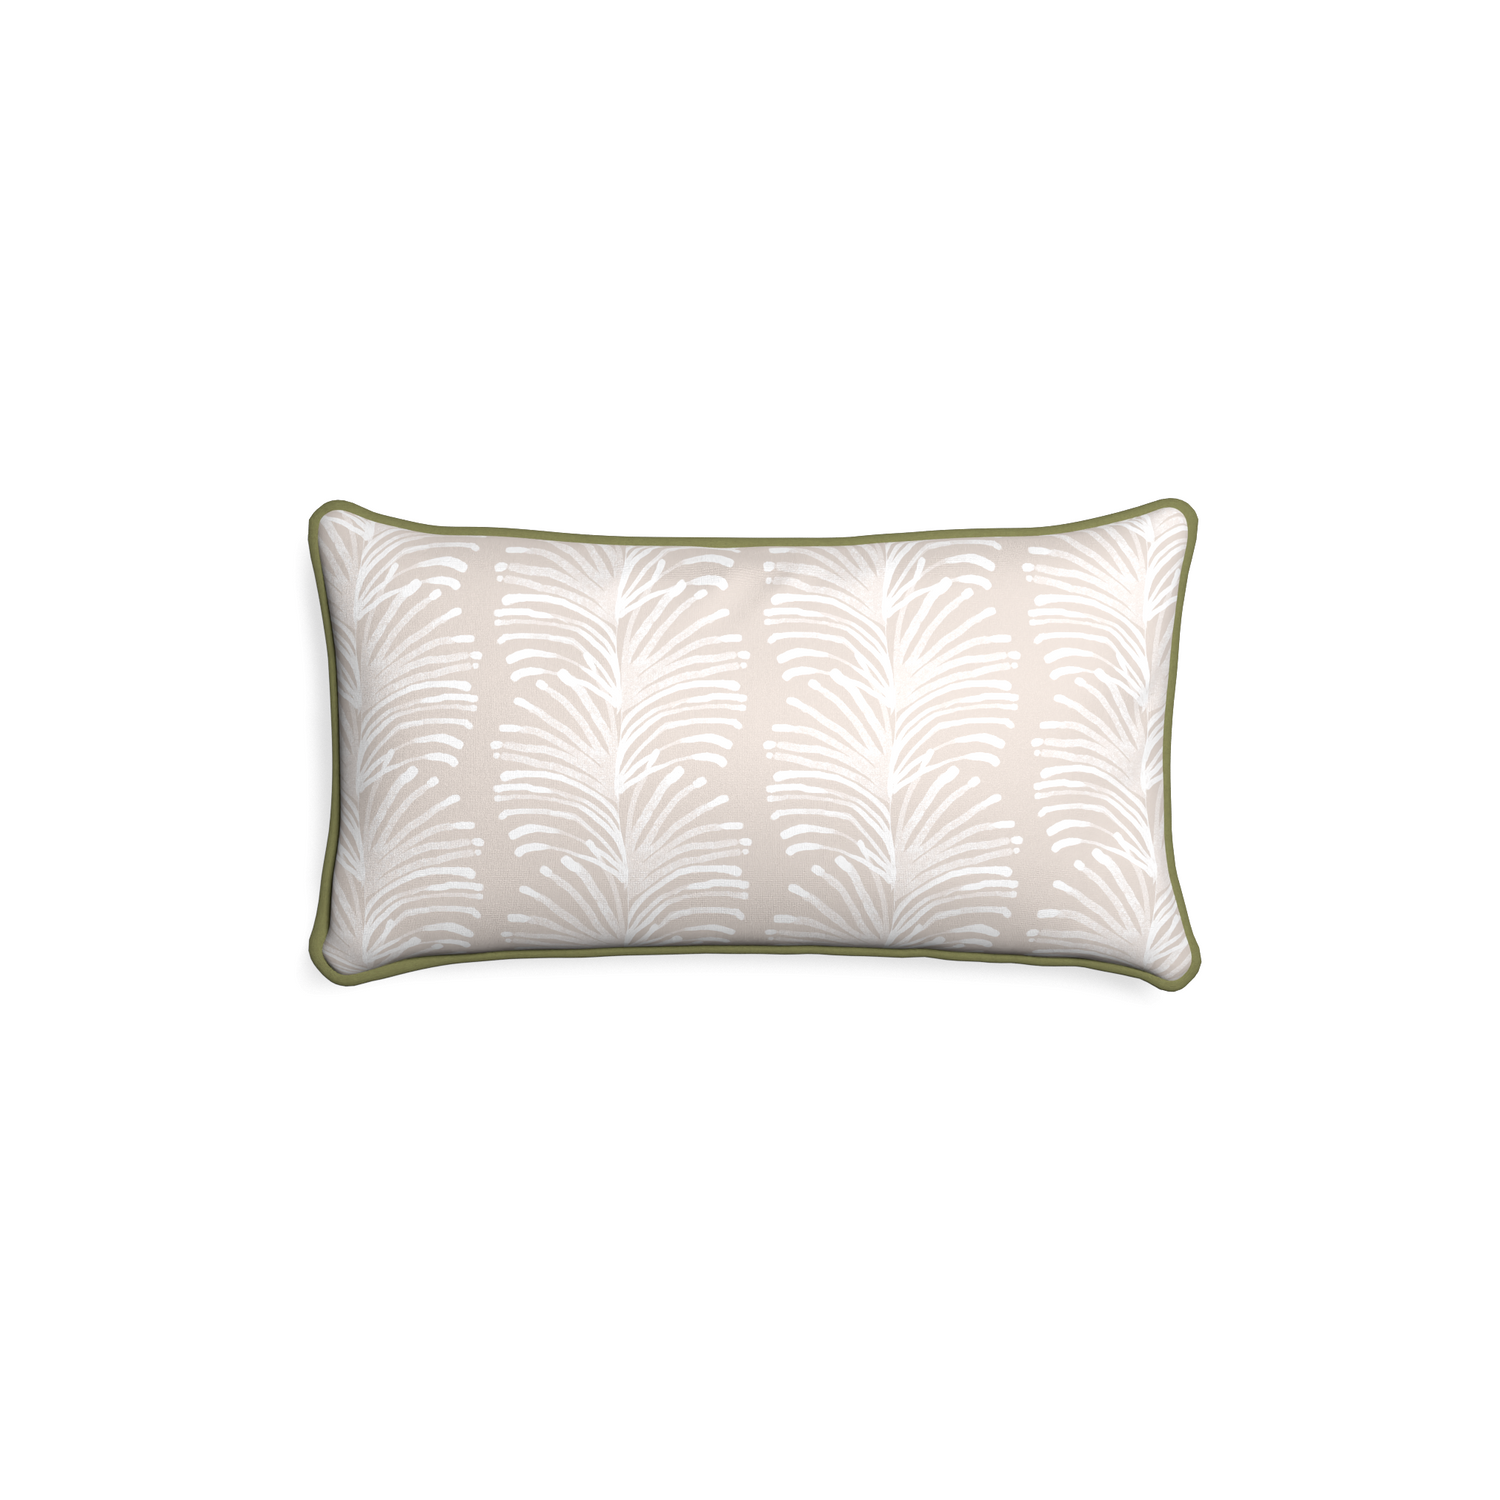 rectangle sand colored botanical stripe pillow with moss green piping